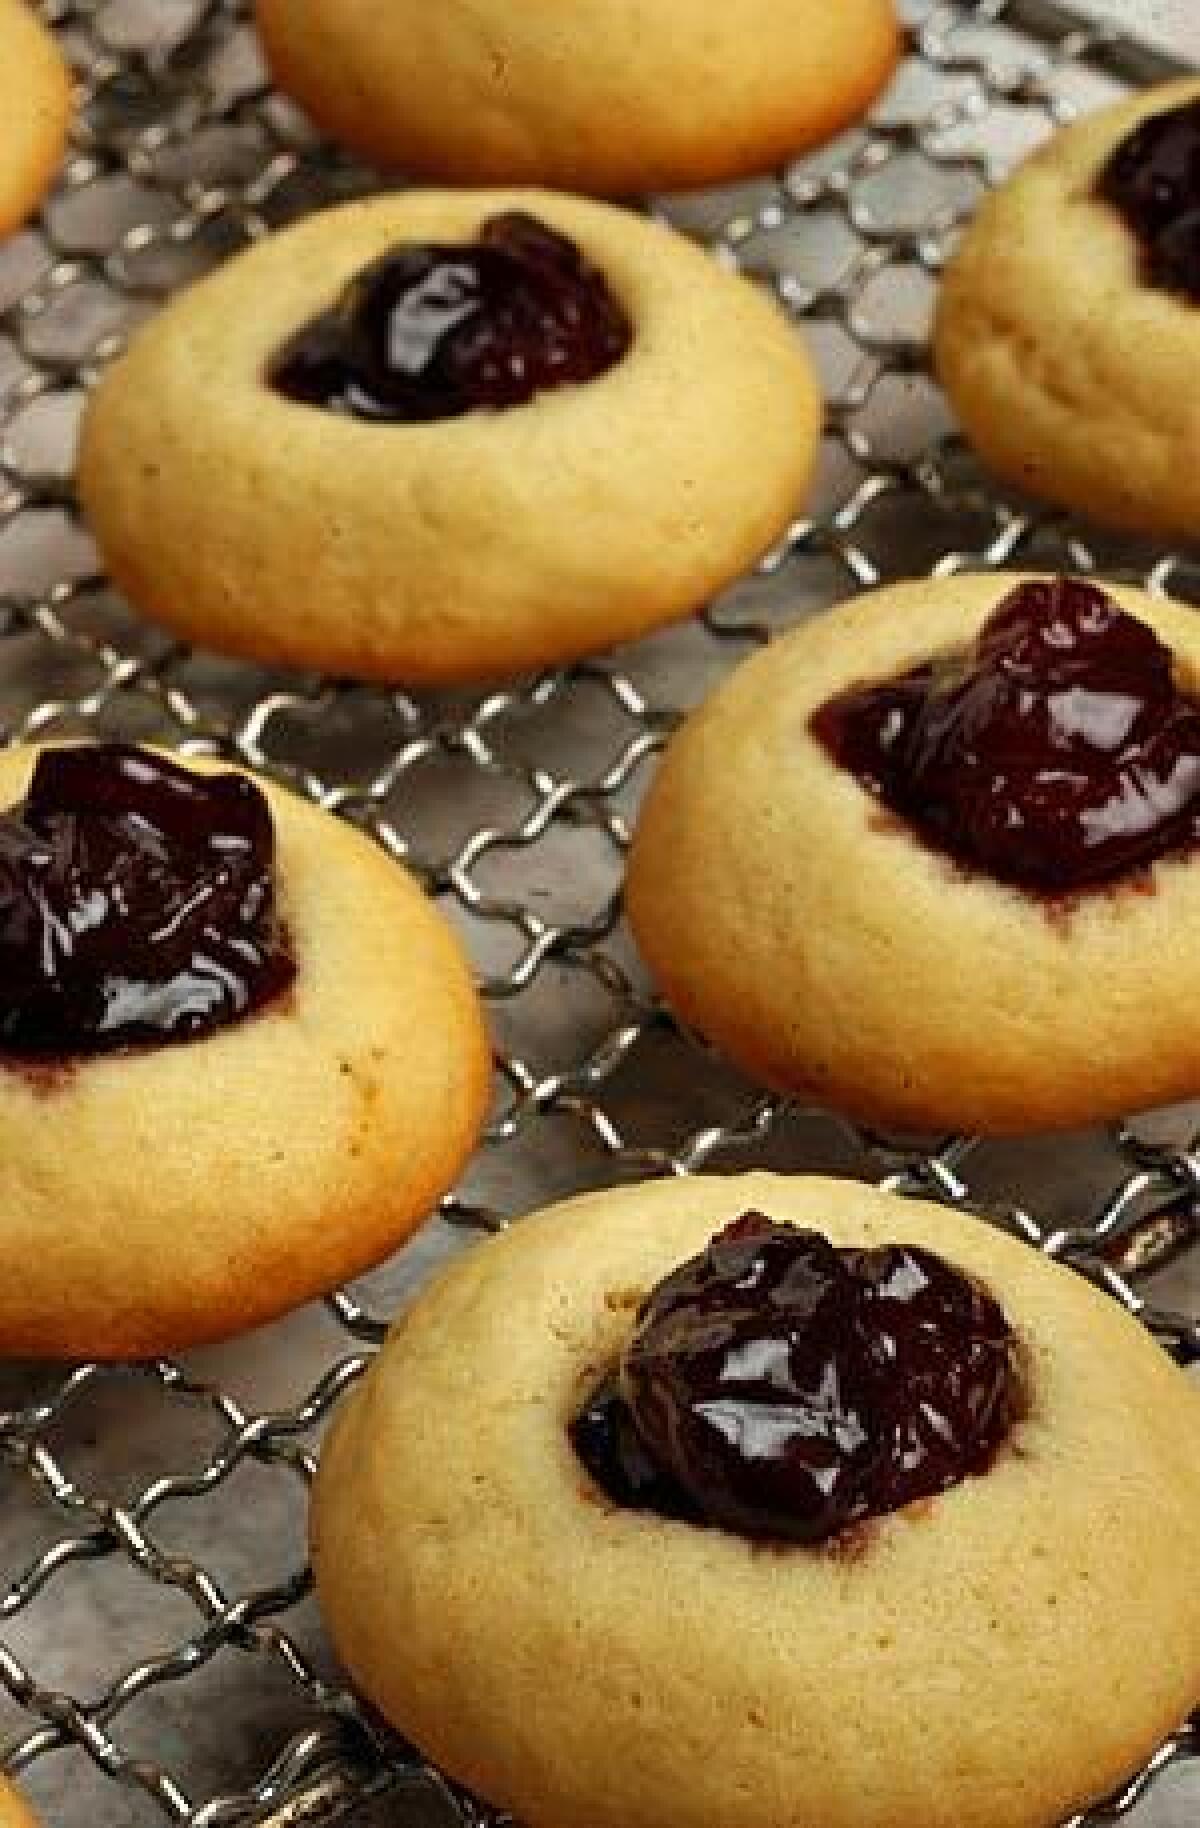 Cherry preserves are spooned into soft, golden thumbprint cookies.